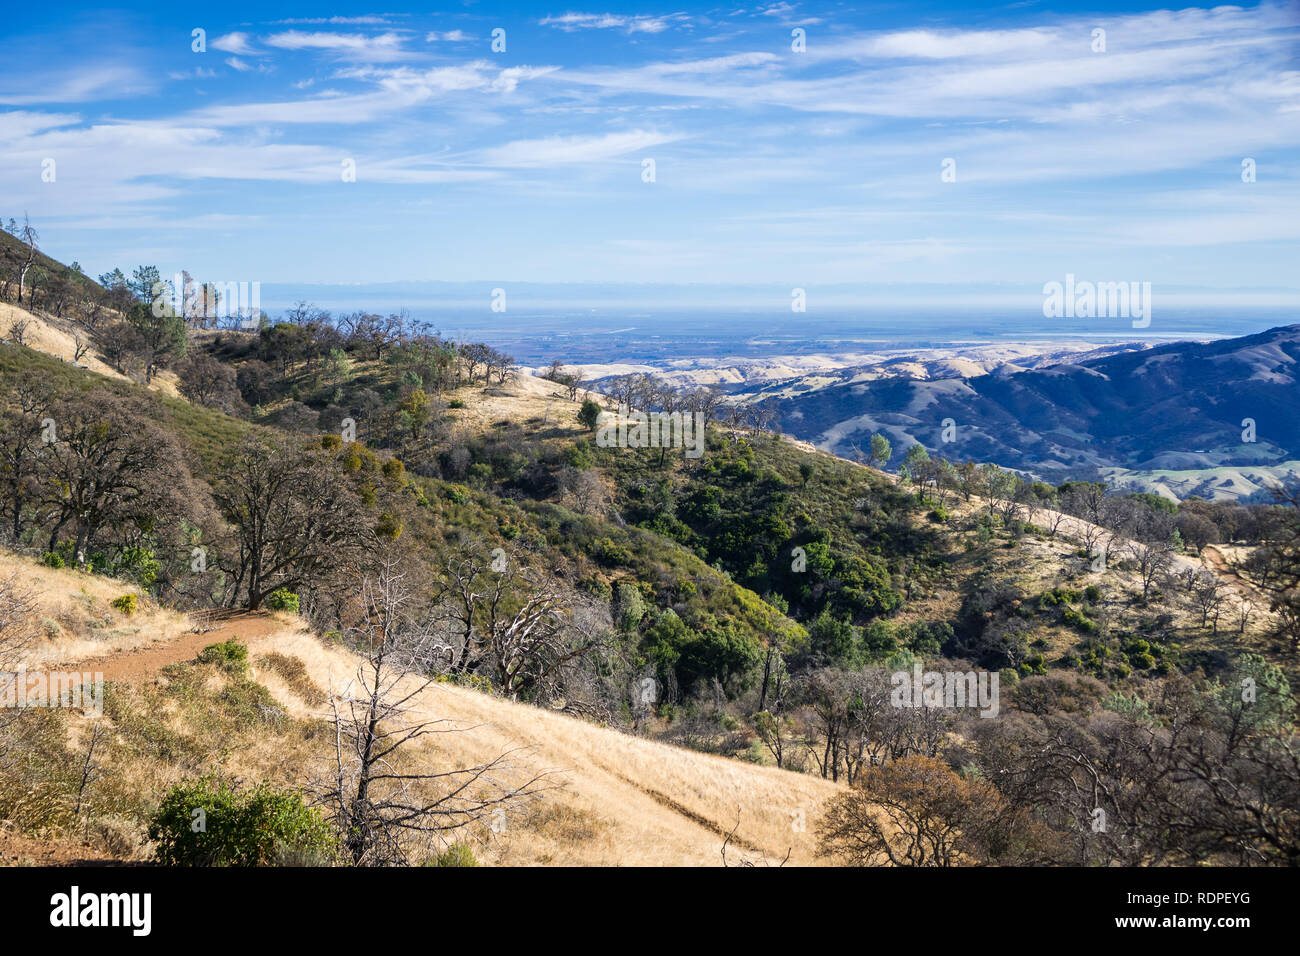 Hiking view of the hills and valleys in Mt Diablo State Park on a sunny morning, Contra Costa county, San Francisco bay area, California Stock Photo